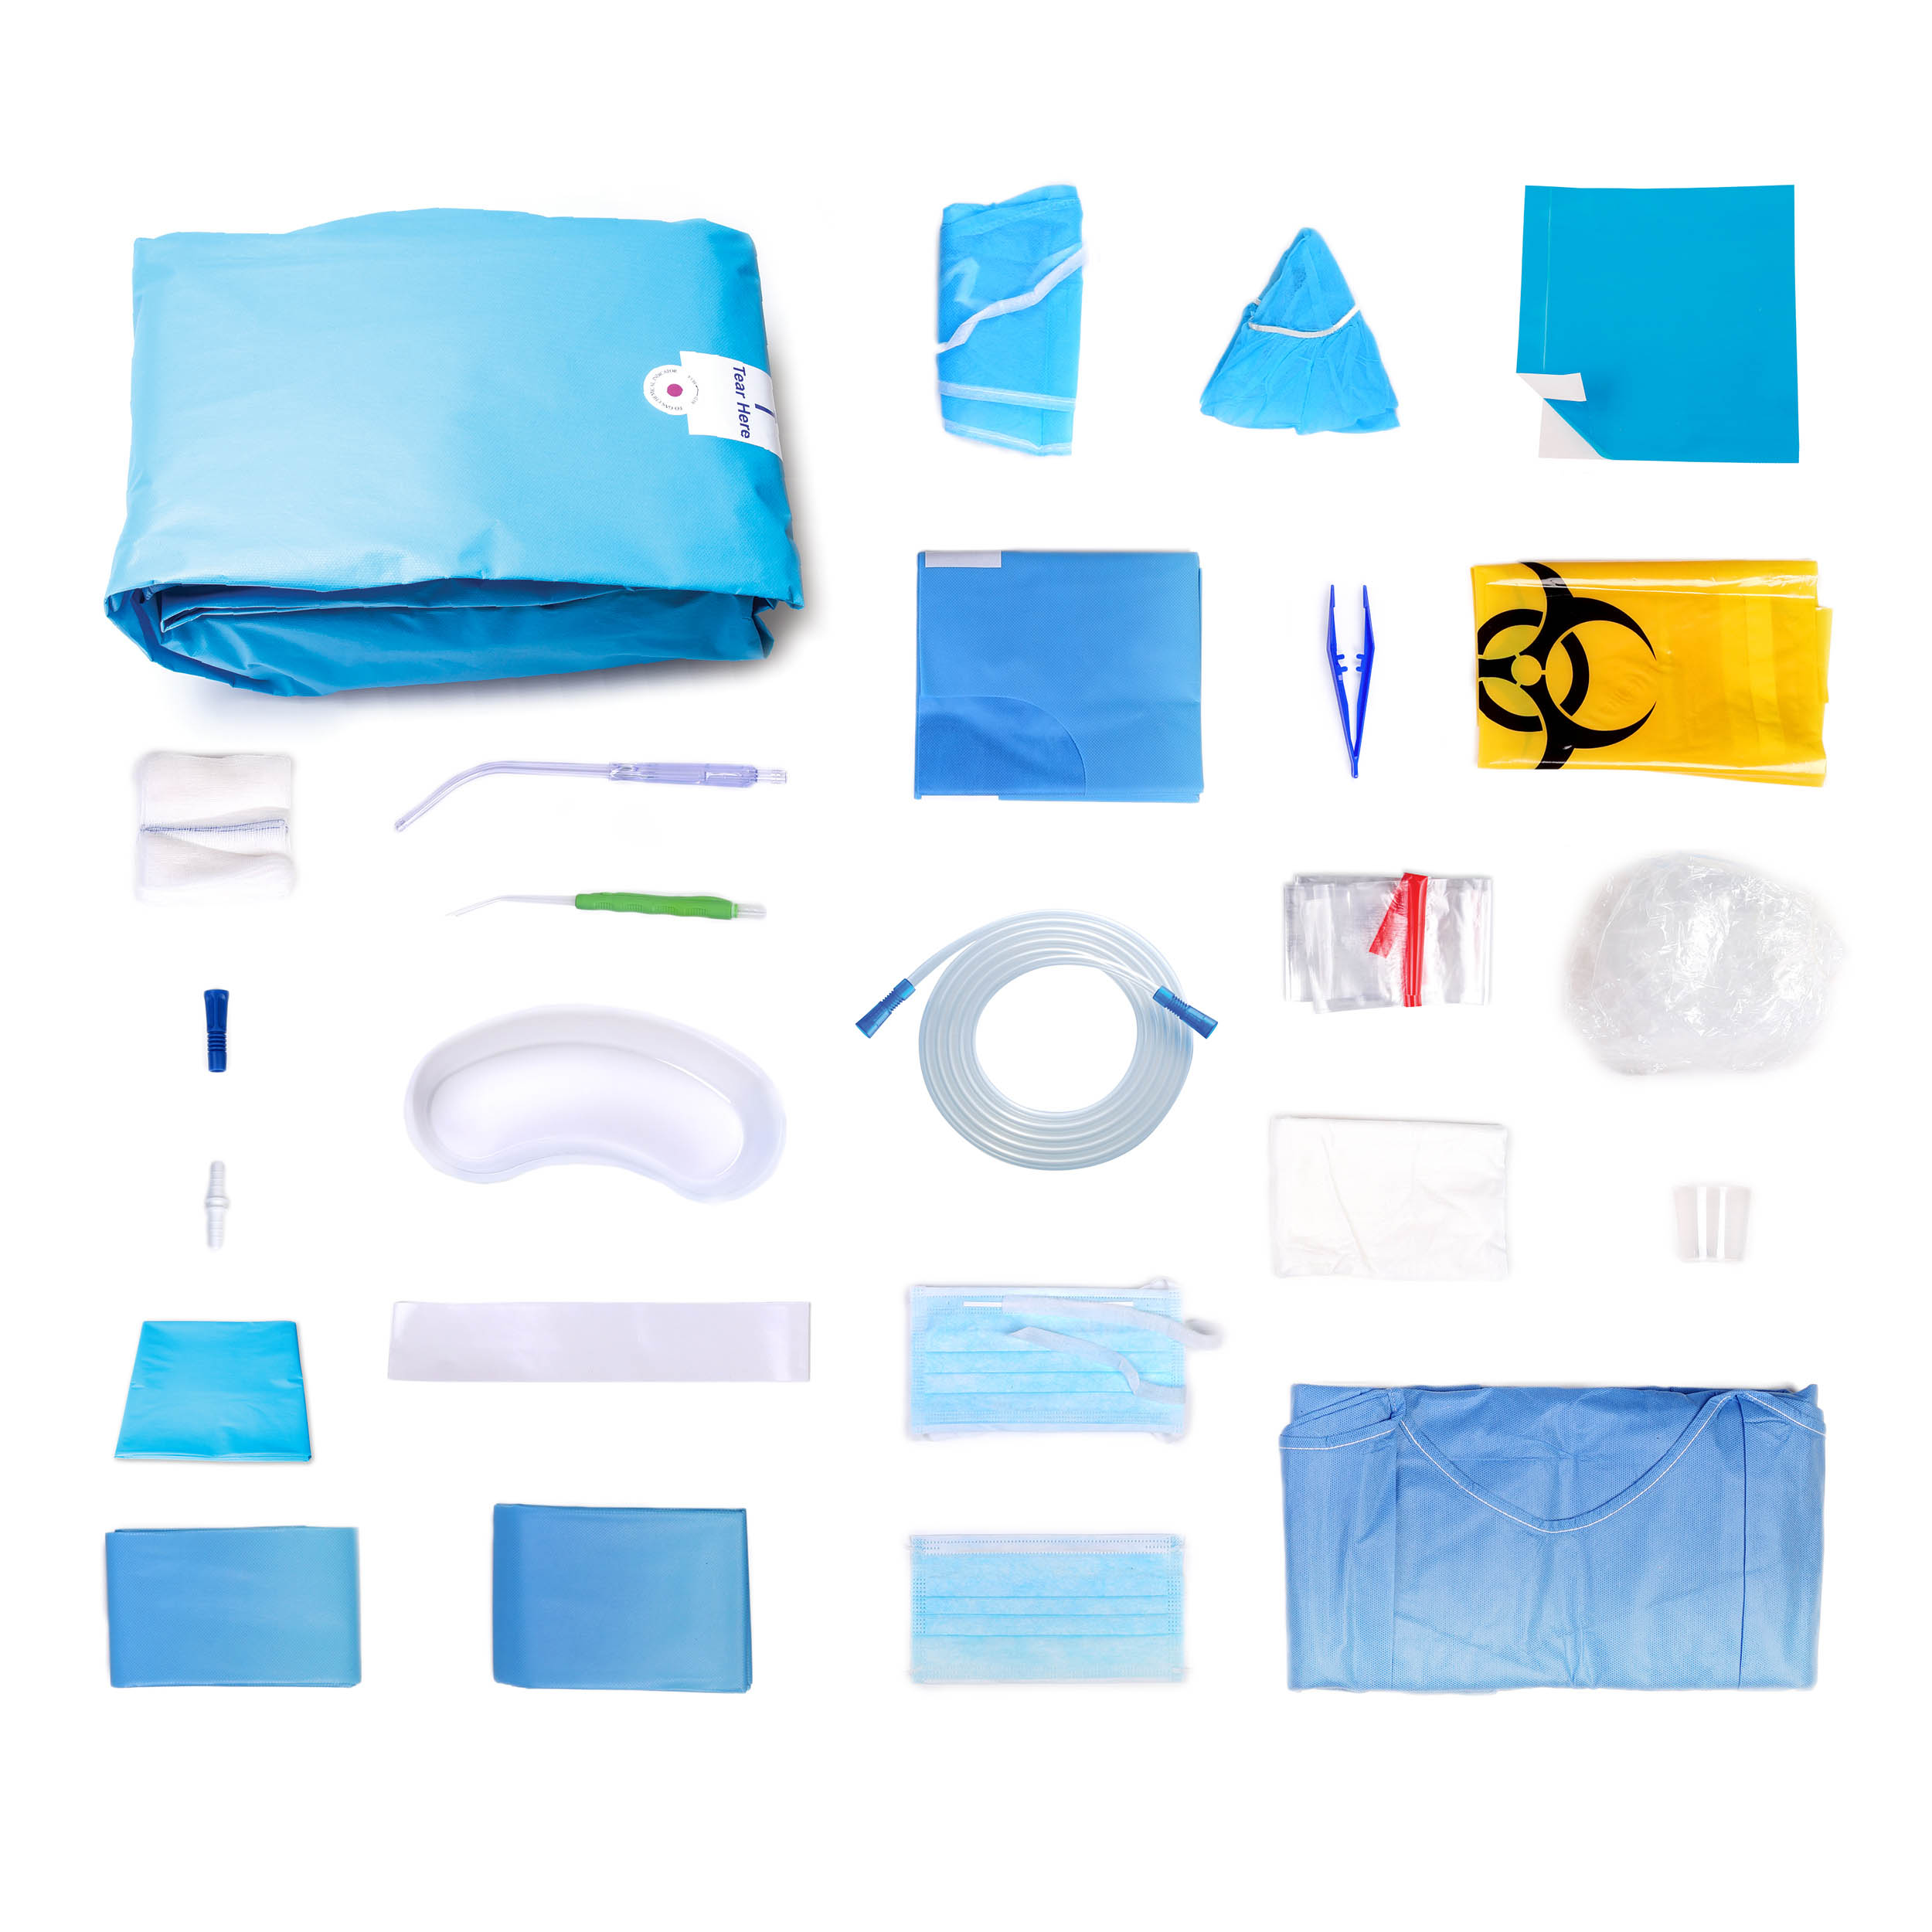 dental procedure pack creates an aseptic barrier during oral surgery